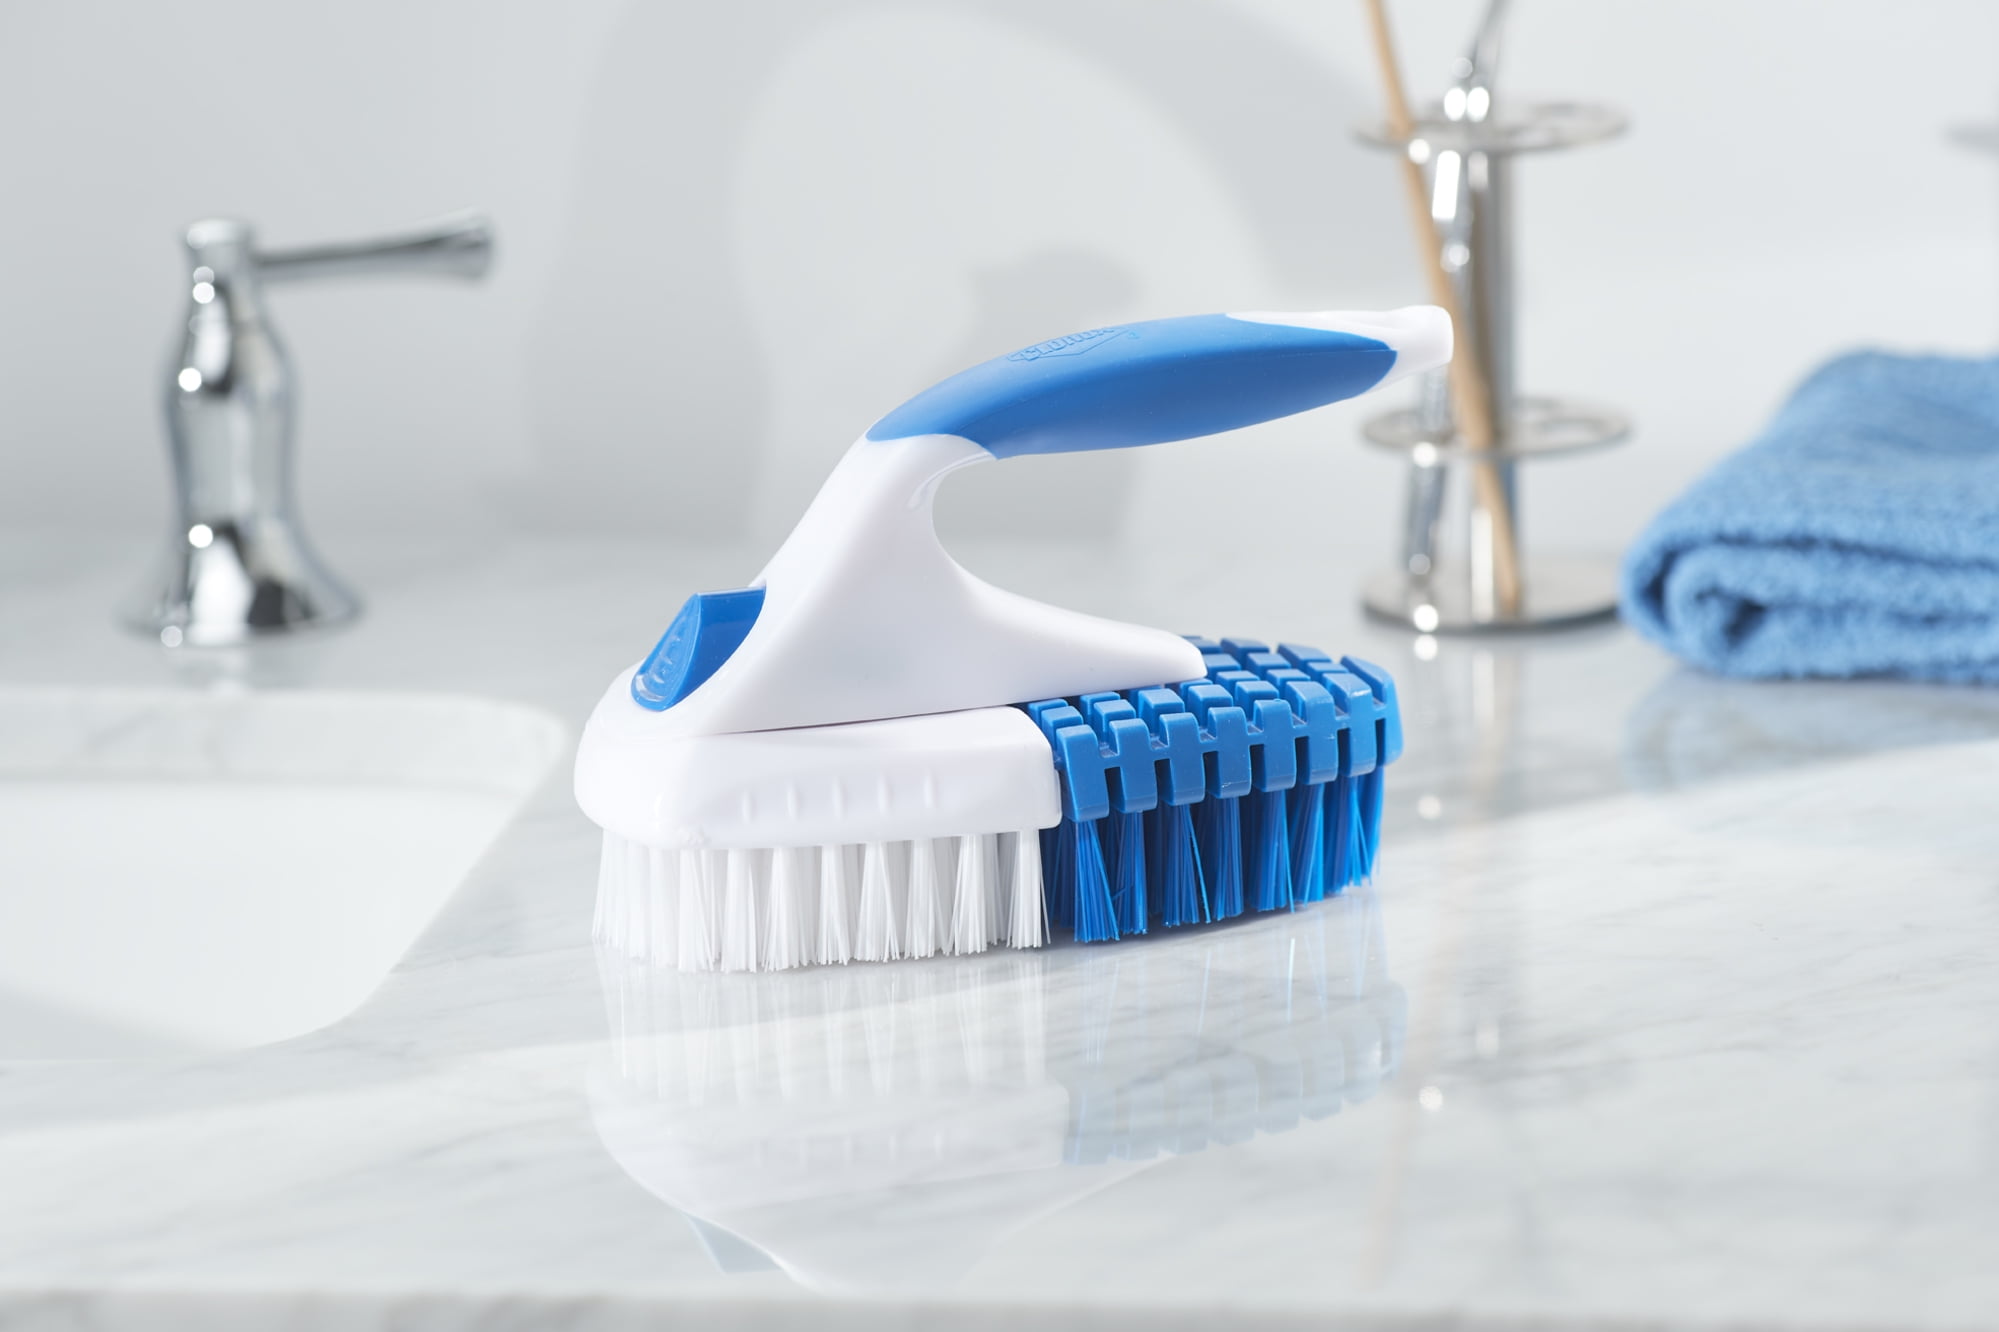 Clorox Multipurpose Flex Scrub Handheld Cleaning Brush with Removable  Handle, Blue/White